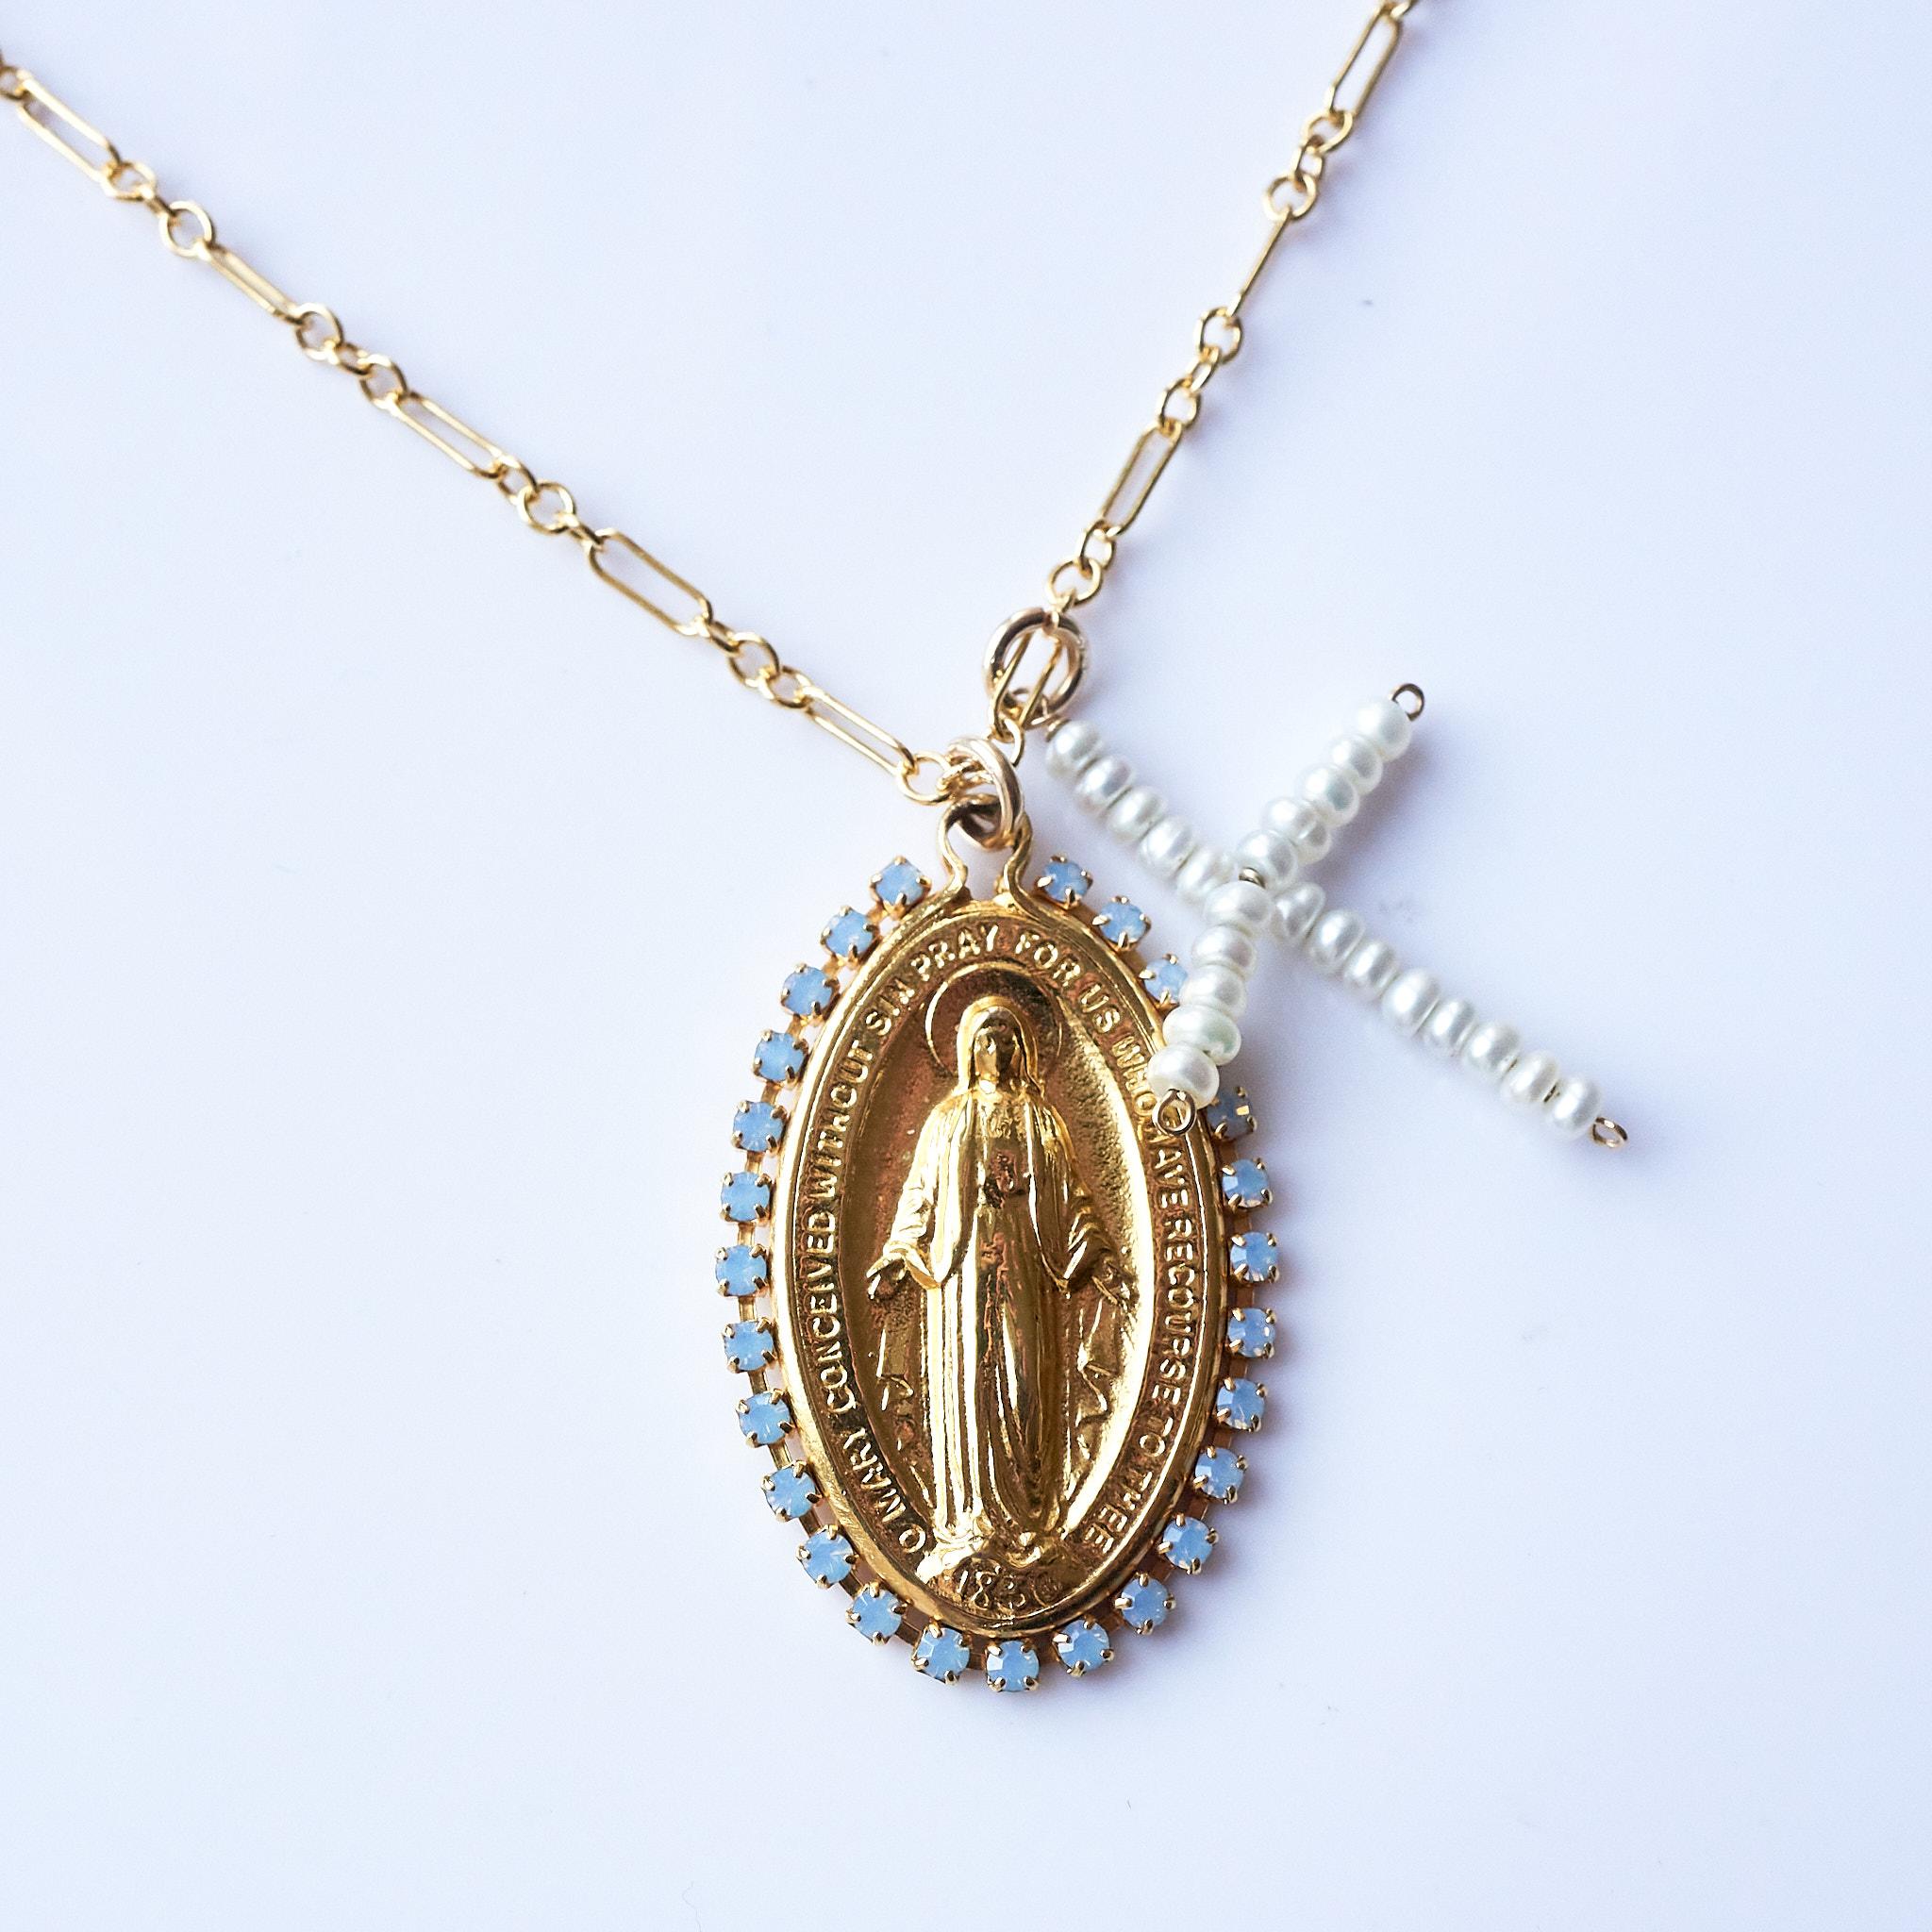 Women's Virgin Mary Oval Medal White Pearl Cross Chain Necklace Light Blue Rhinestone For Sale